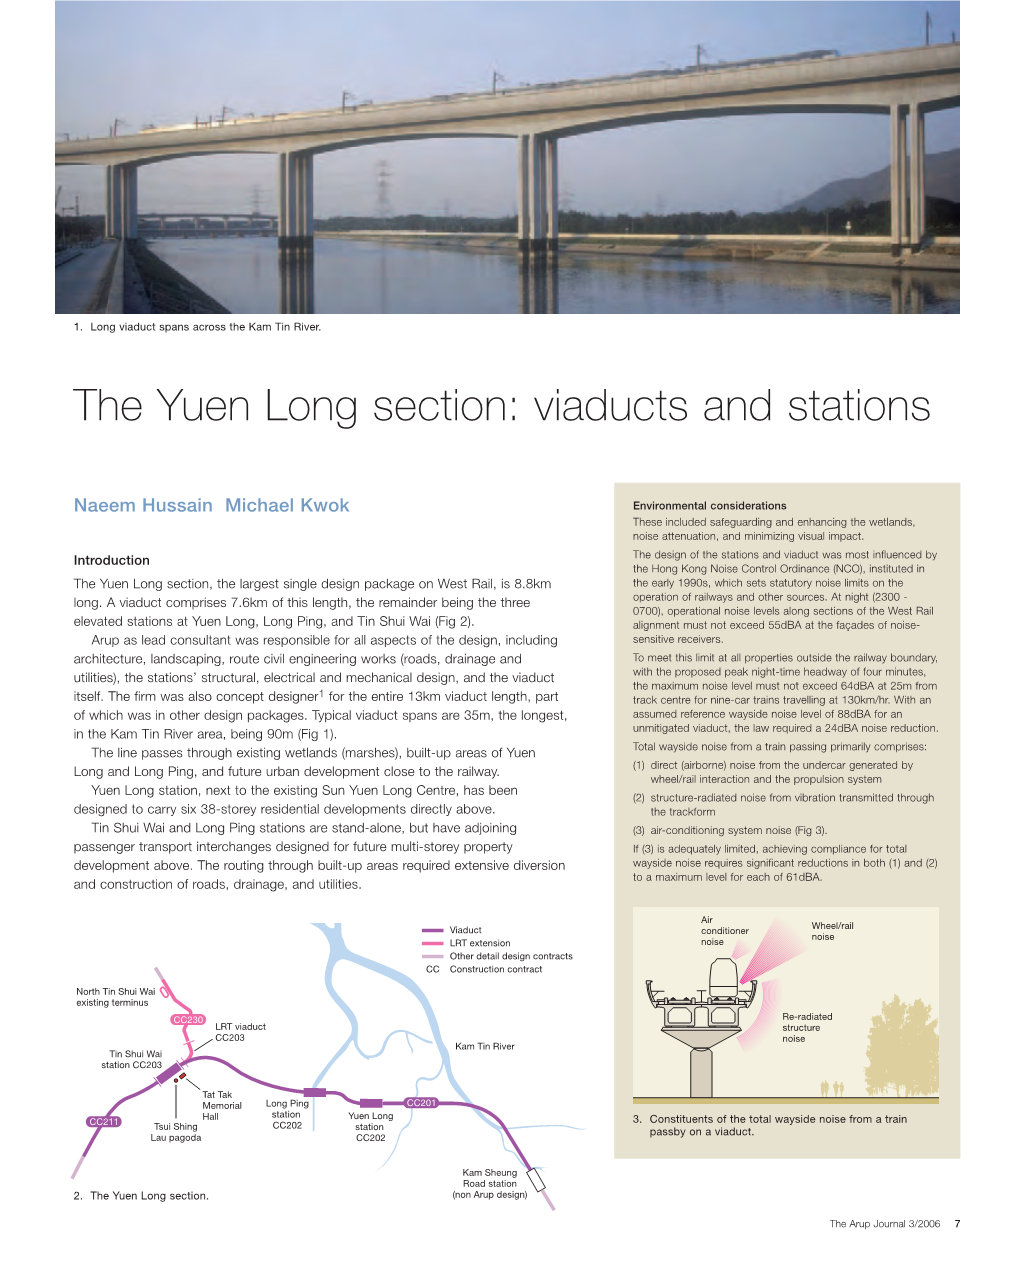 The Yuen Long Section: Viaducts and Stations